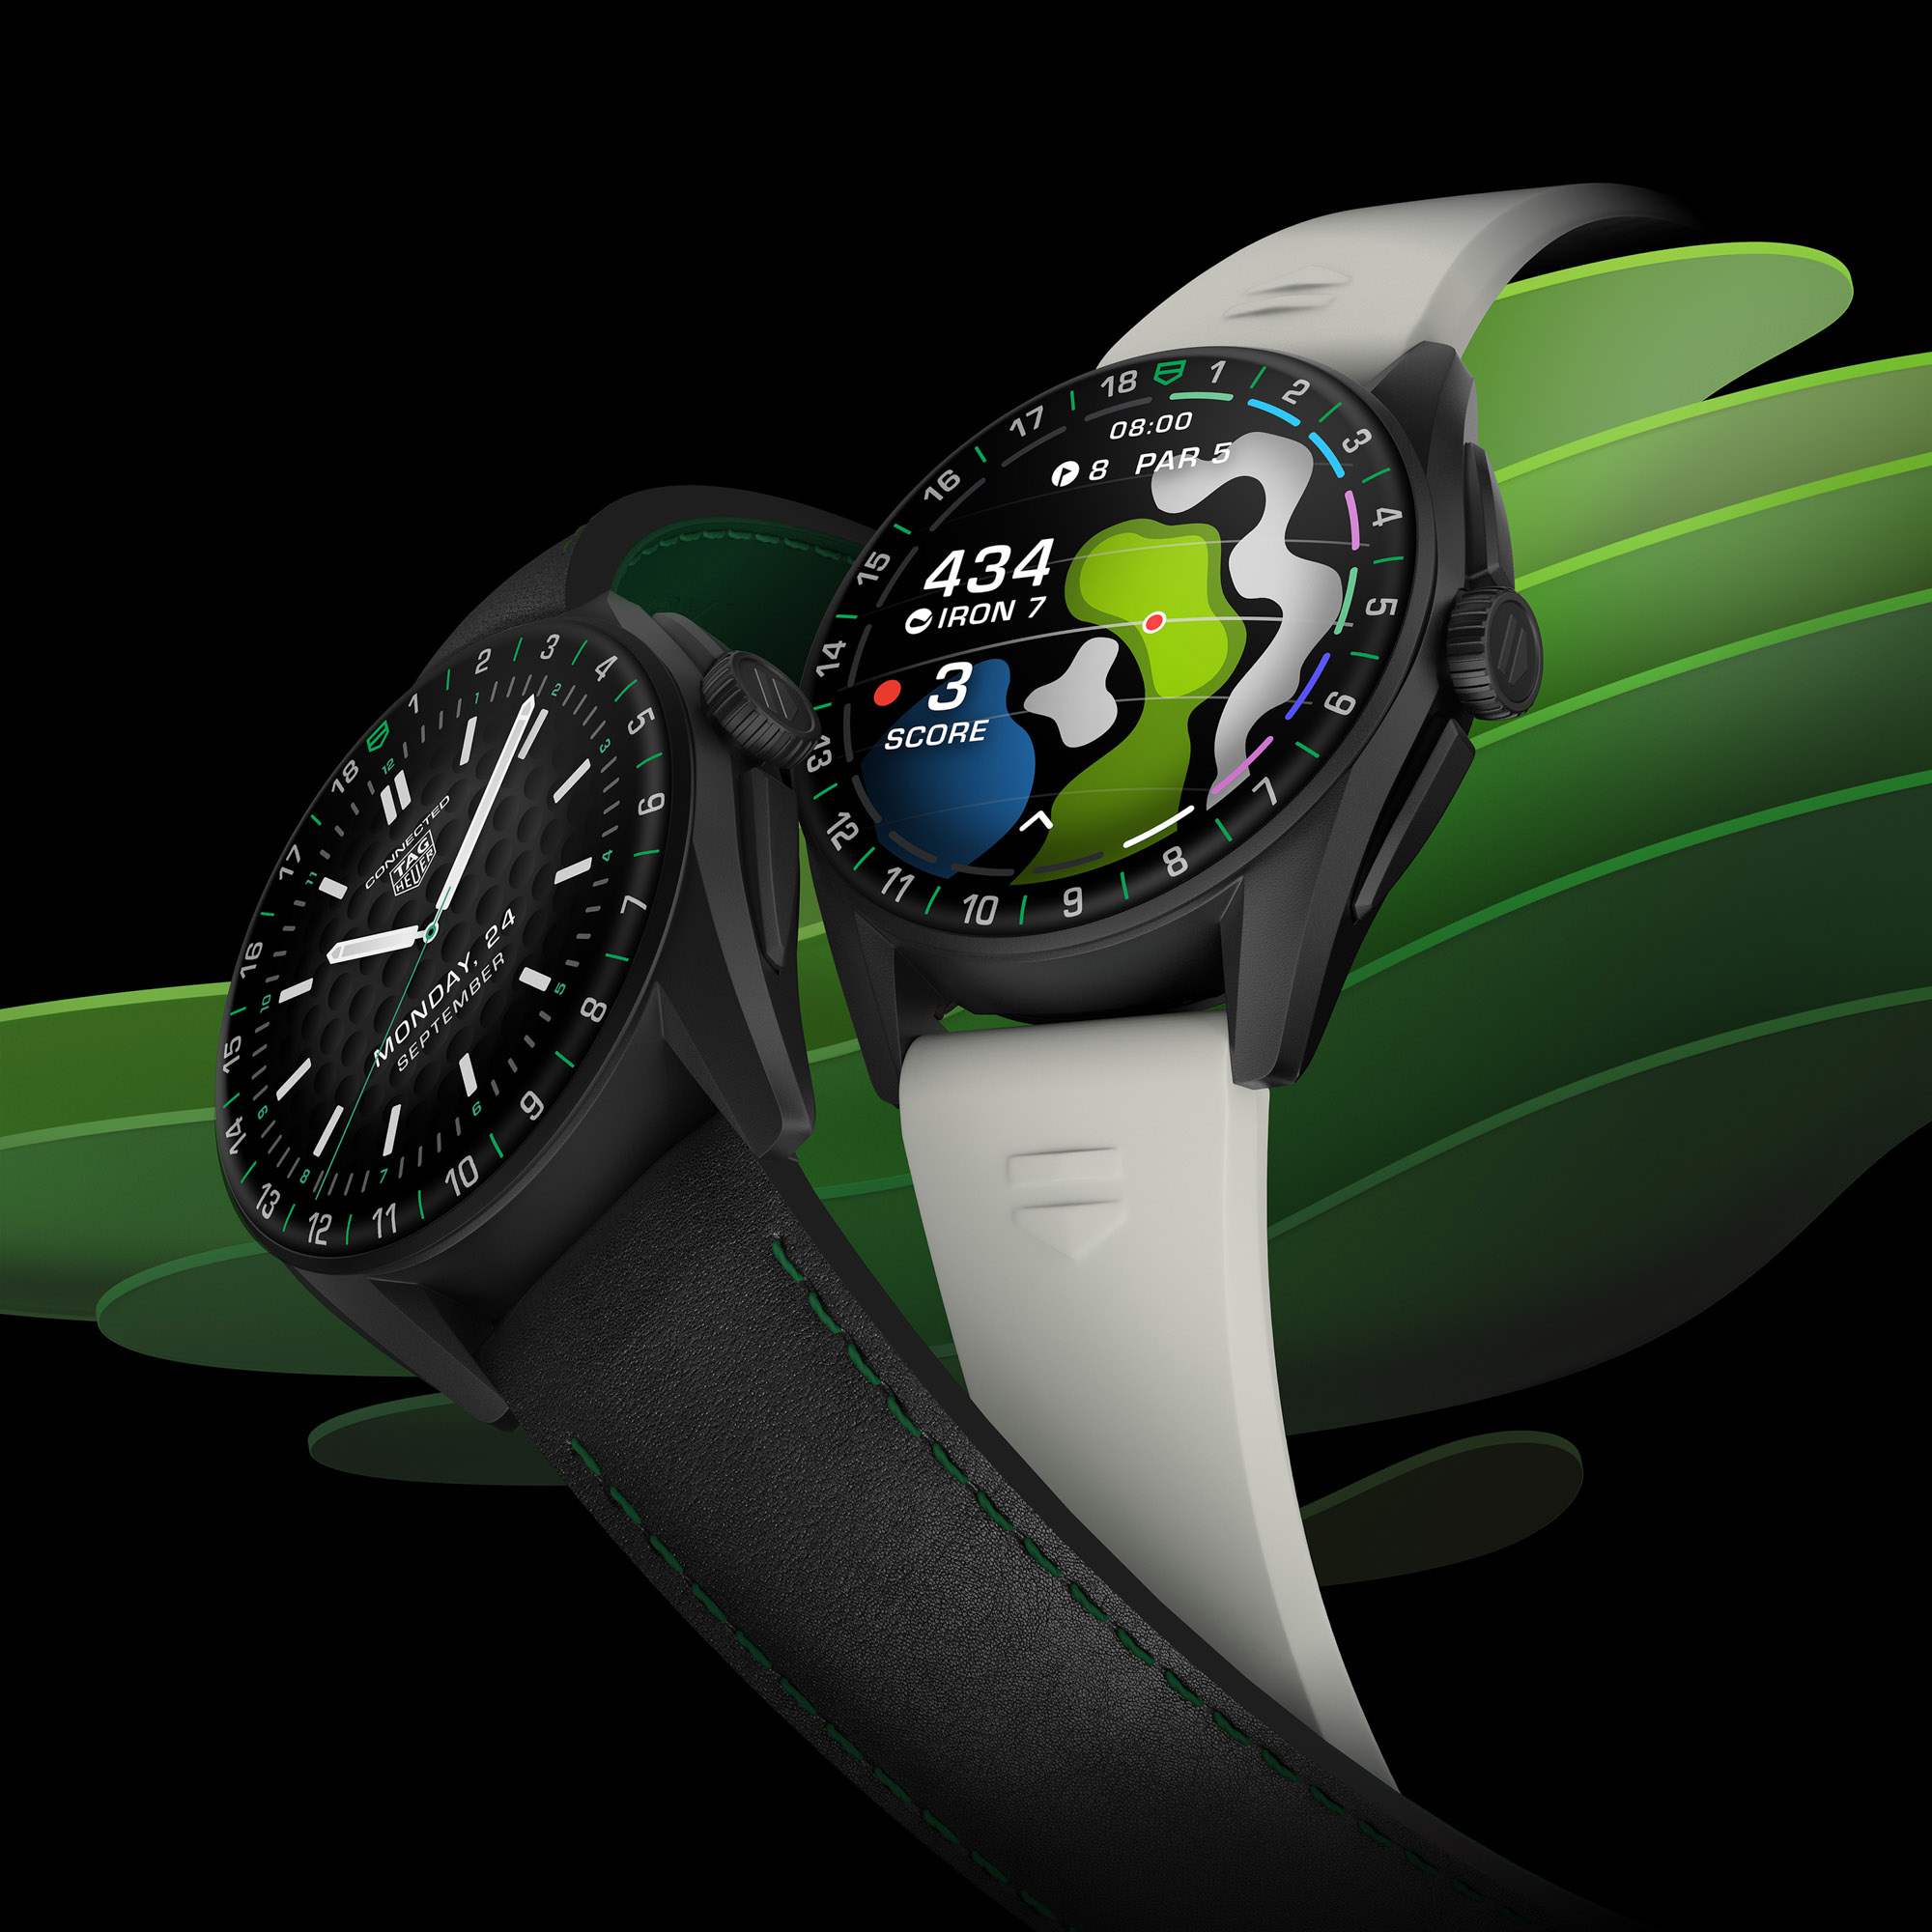 Tag Heuer Connected 42mm Smart Watch